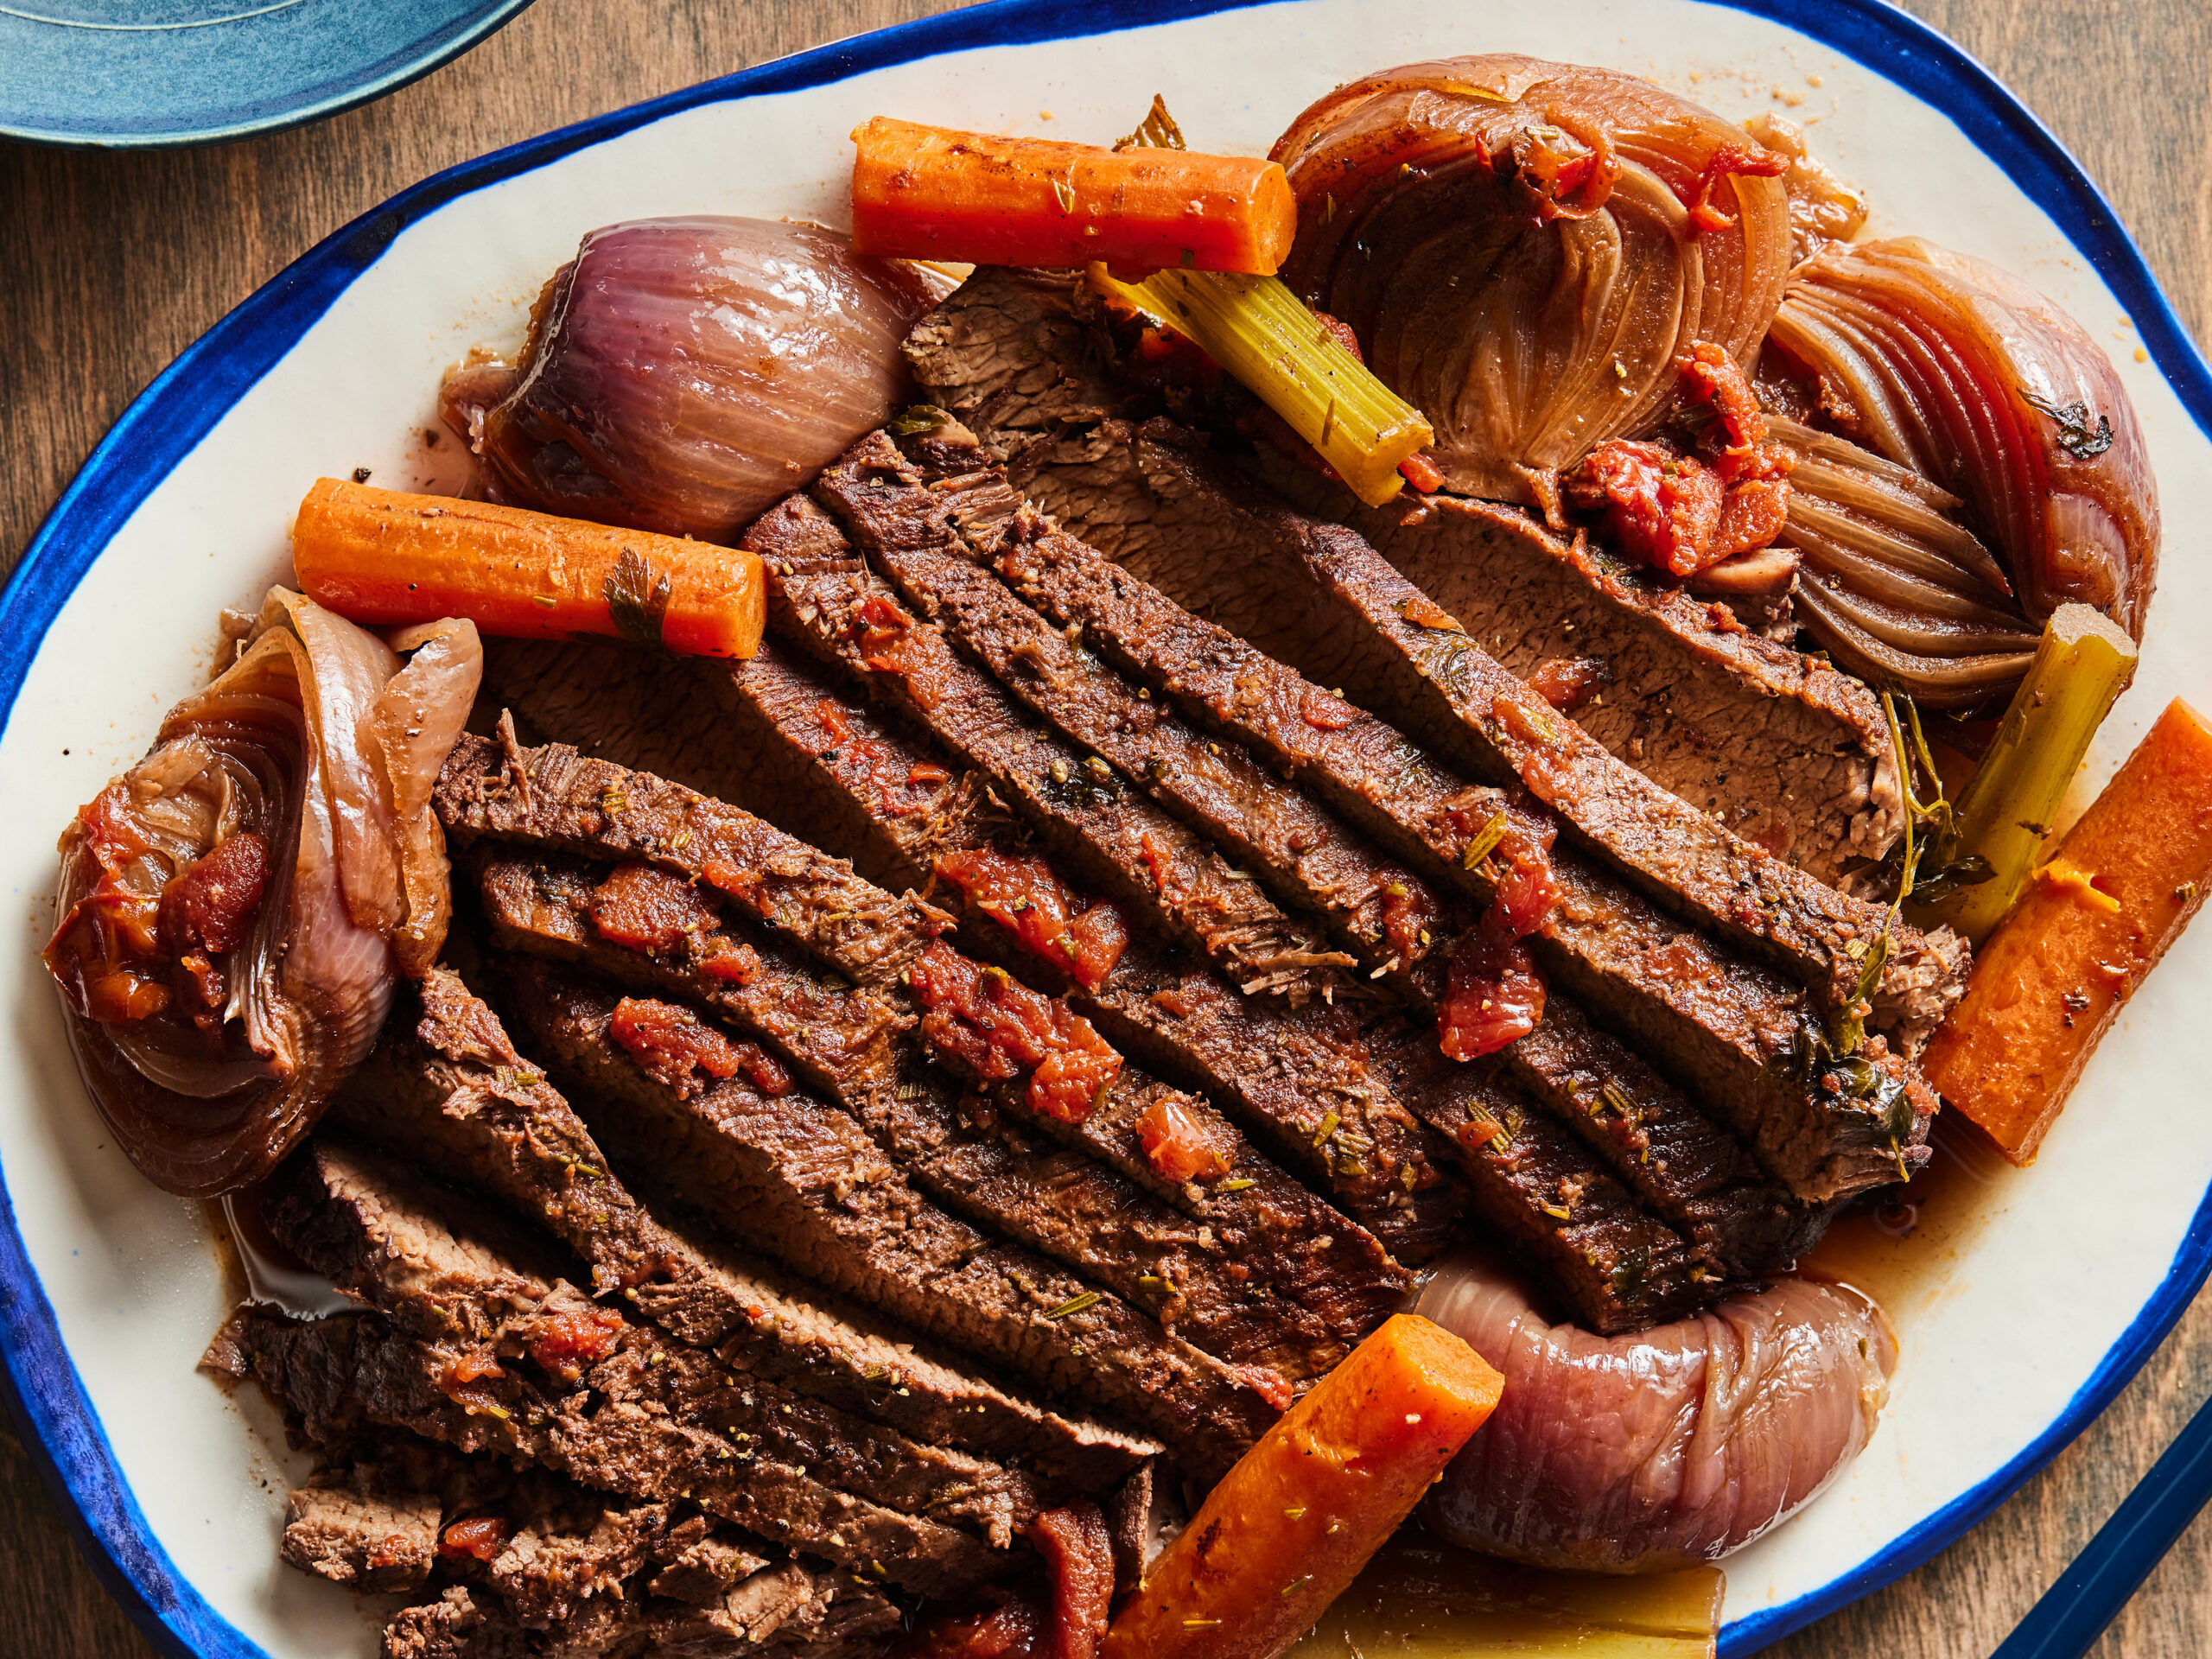 How Long To Cook Brisket In Oven At 275 Degrees Fahrenheit